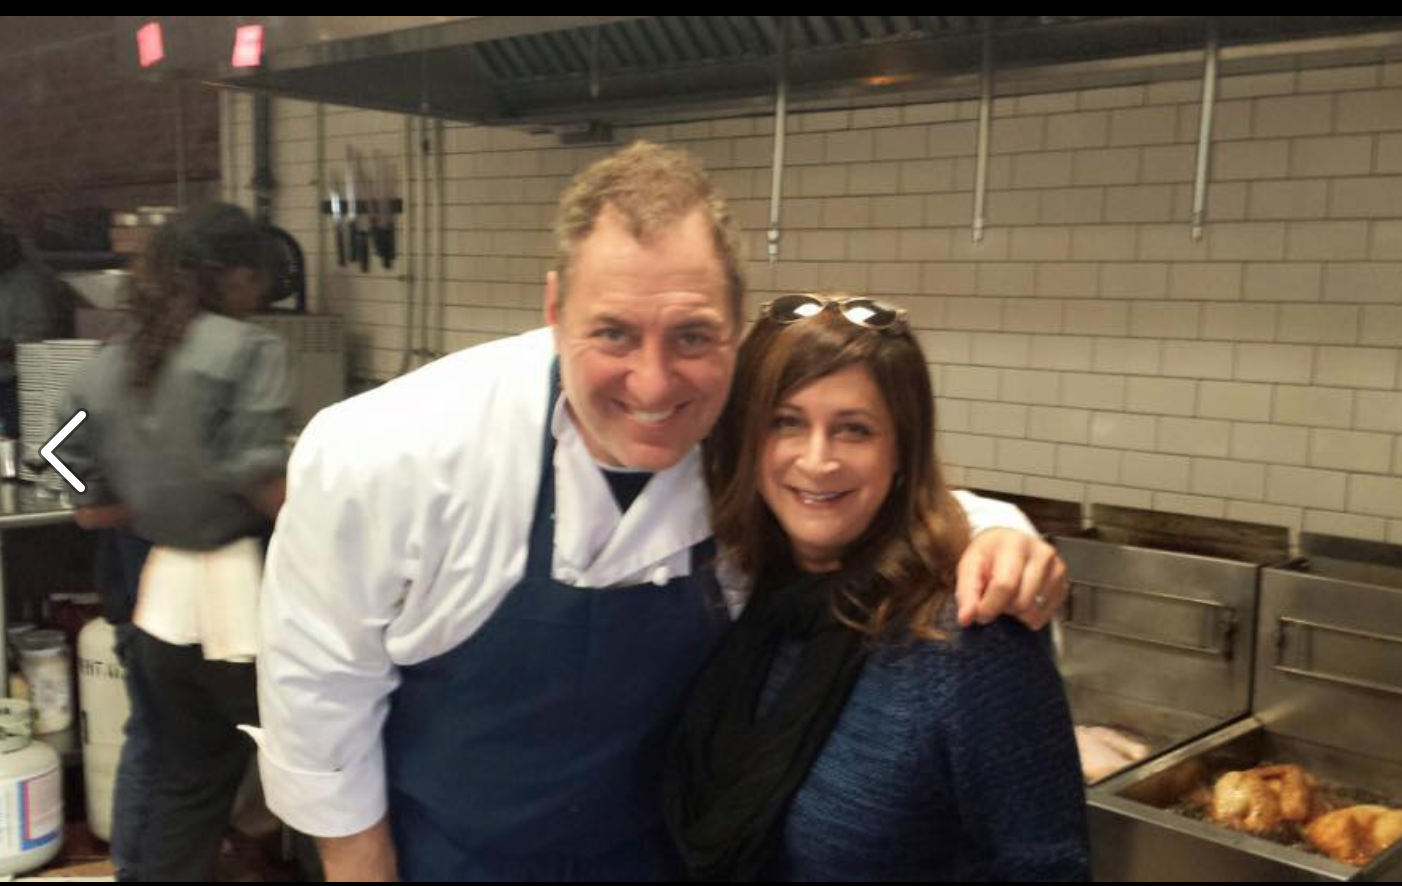 As Thanksgiving turkeys fry in the background, WTOP's Deborah Feinstein visits the kitchen with Medium Rare co-owner Mark Bucher on a previous Thanksgiving Day. (Courtesy Mark Bucher)